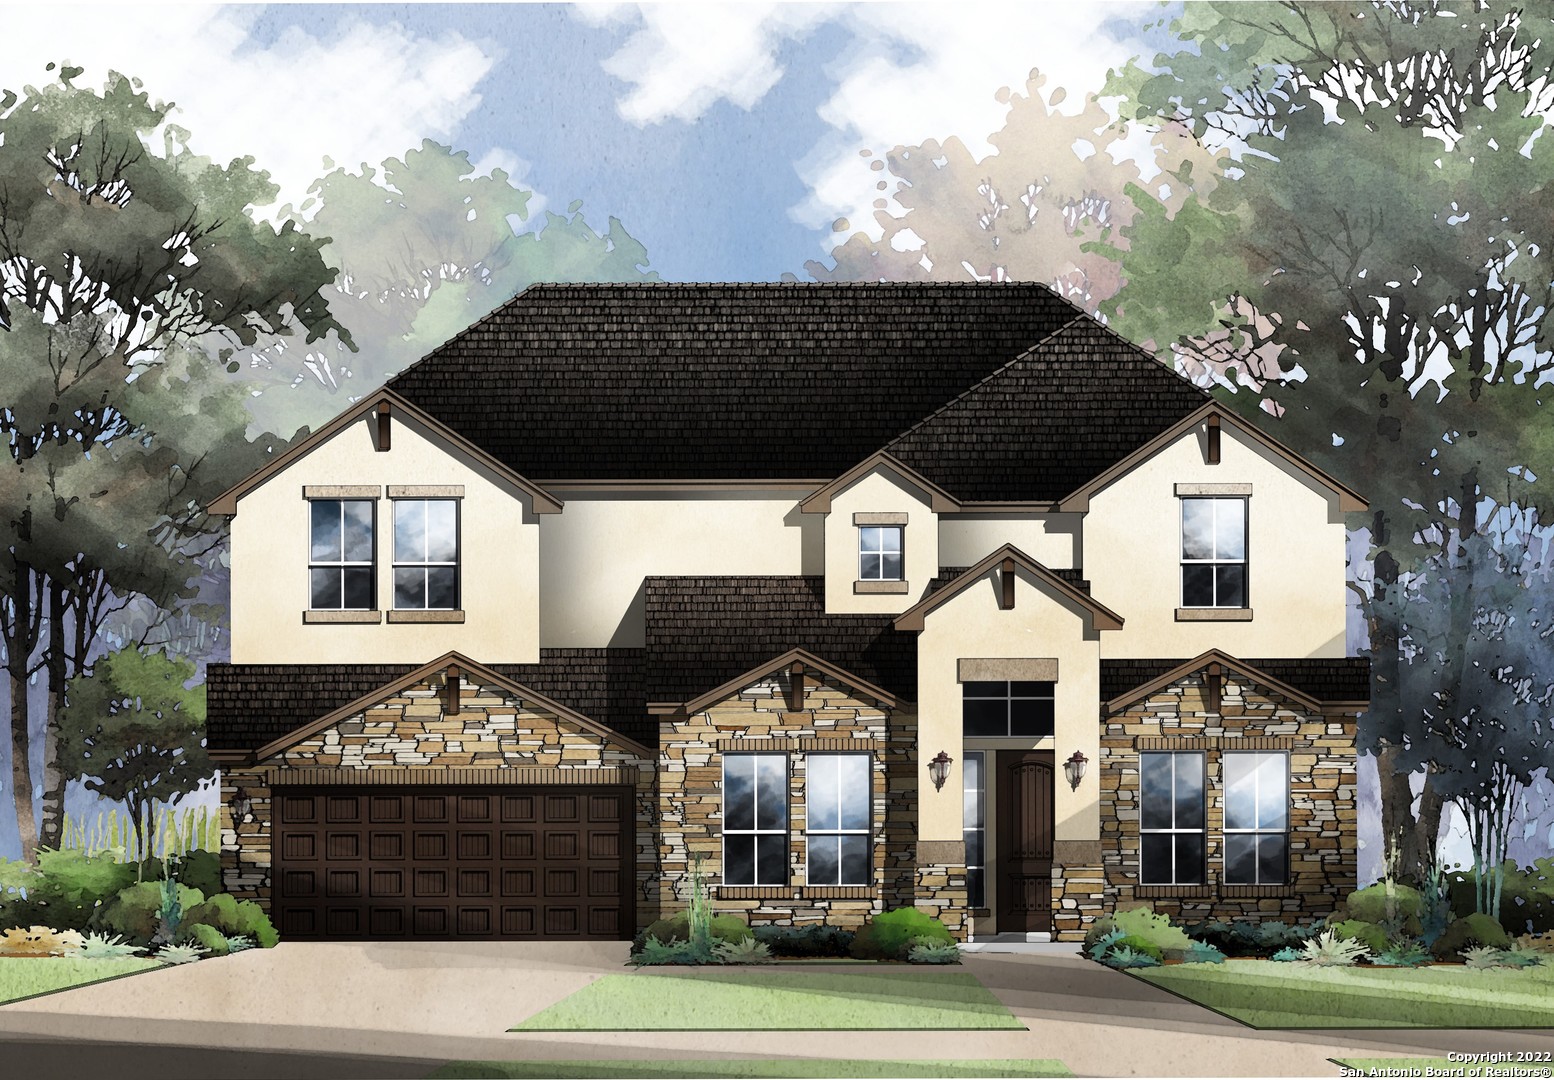 Come & experience the desireable Hill Country Lifestyle in your newly constructed Monticello Home in gated River Rock Ranch community. 9033 Imposing Oak features our LAFAYETTE plan - 3,481 sqft, 2 story -4 bedroom/3.5 bath home, perfect for large families. Includes a Study, Media Rm & Game Rm. The large 19 x 10 extended covered patio is perfect for outdoor living or entertaining guests. Complete with high ceilings, oversized windows, and a 3 car tandem garage. Current pricing features a multiitude of upgrades including cabinets, flooring, countertops, bay window in master bedroom, and much more. Home is pre-plumbed for future water softner & comes with home security. Other features include an attractive landscaping package complete with full sod, irrigation, and cedar privacy fence.